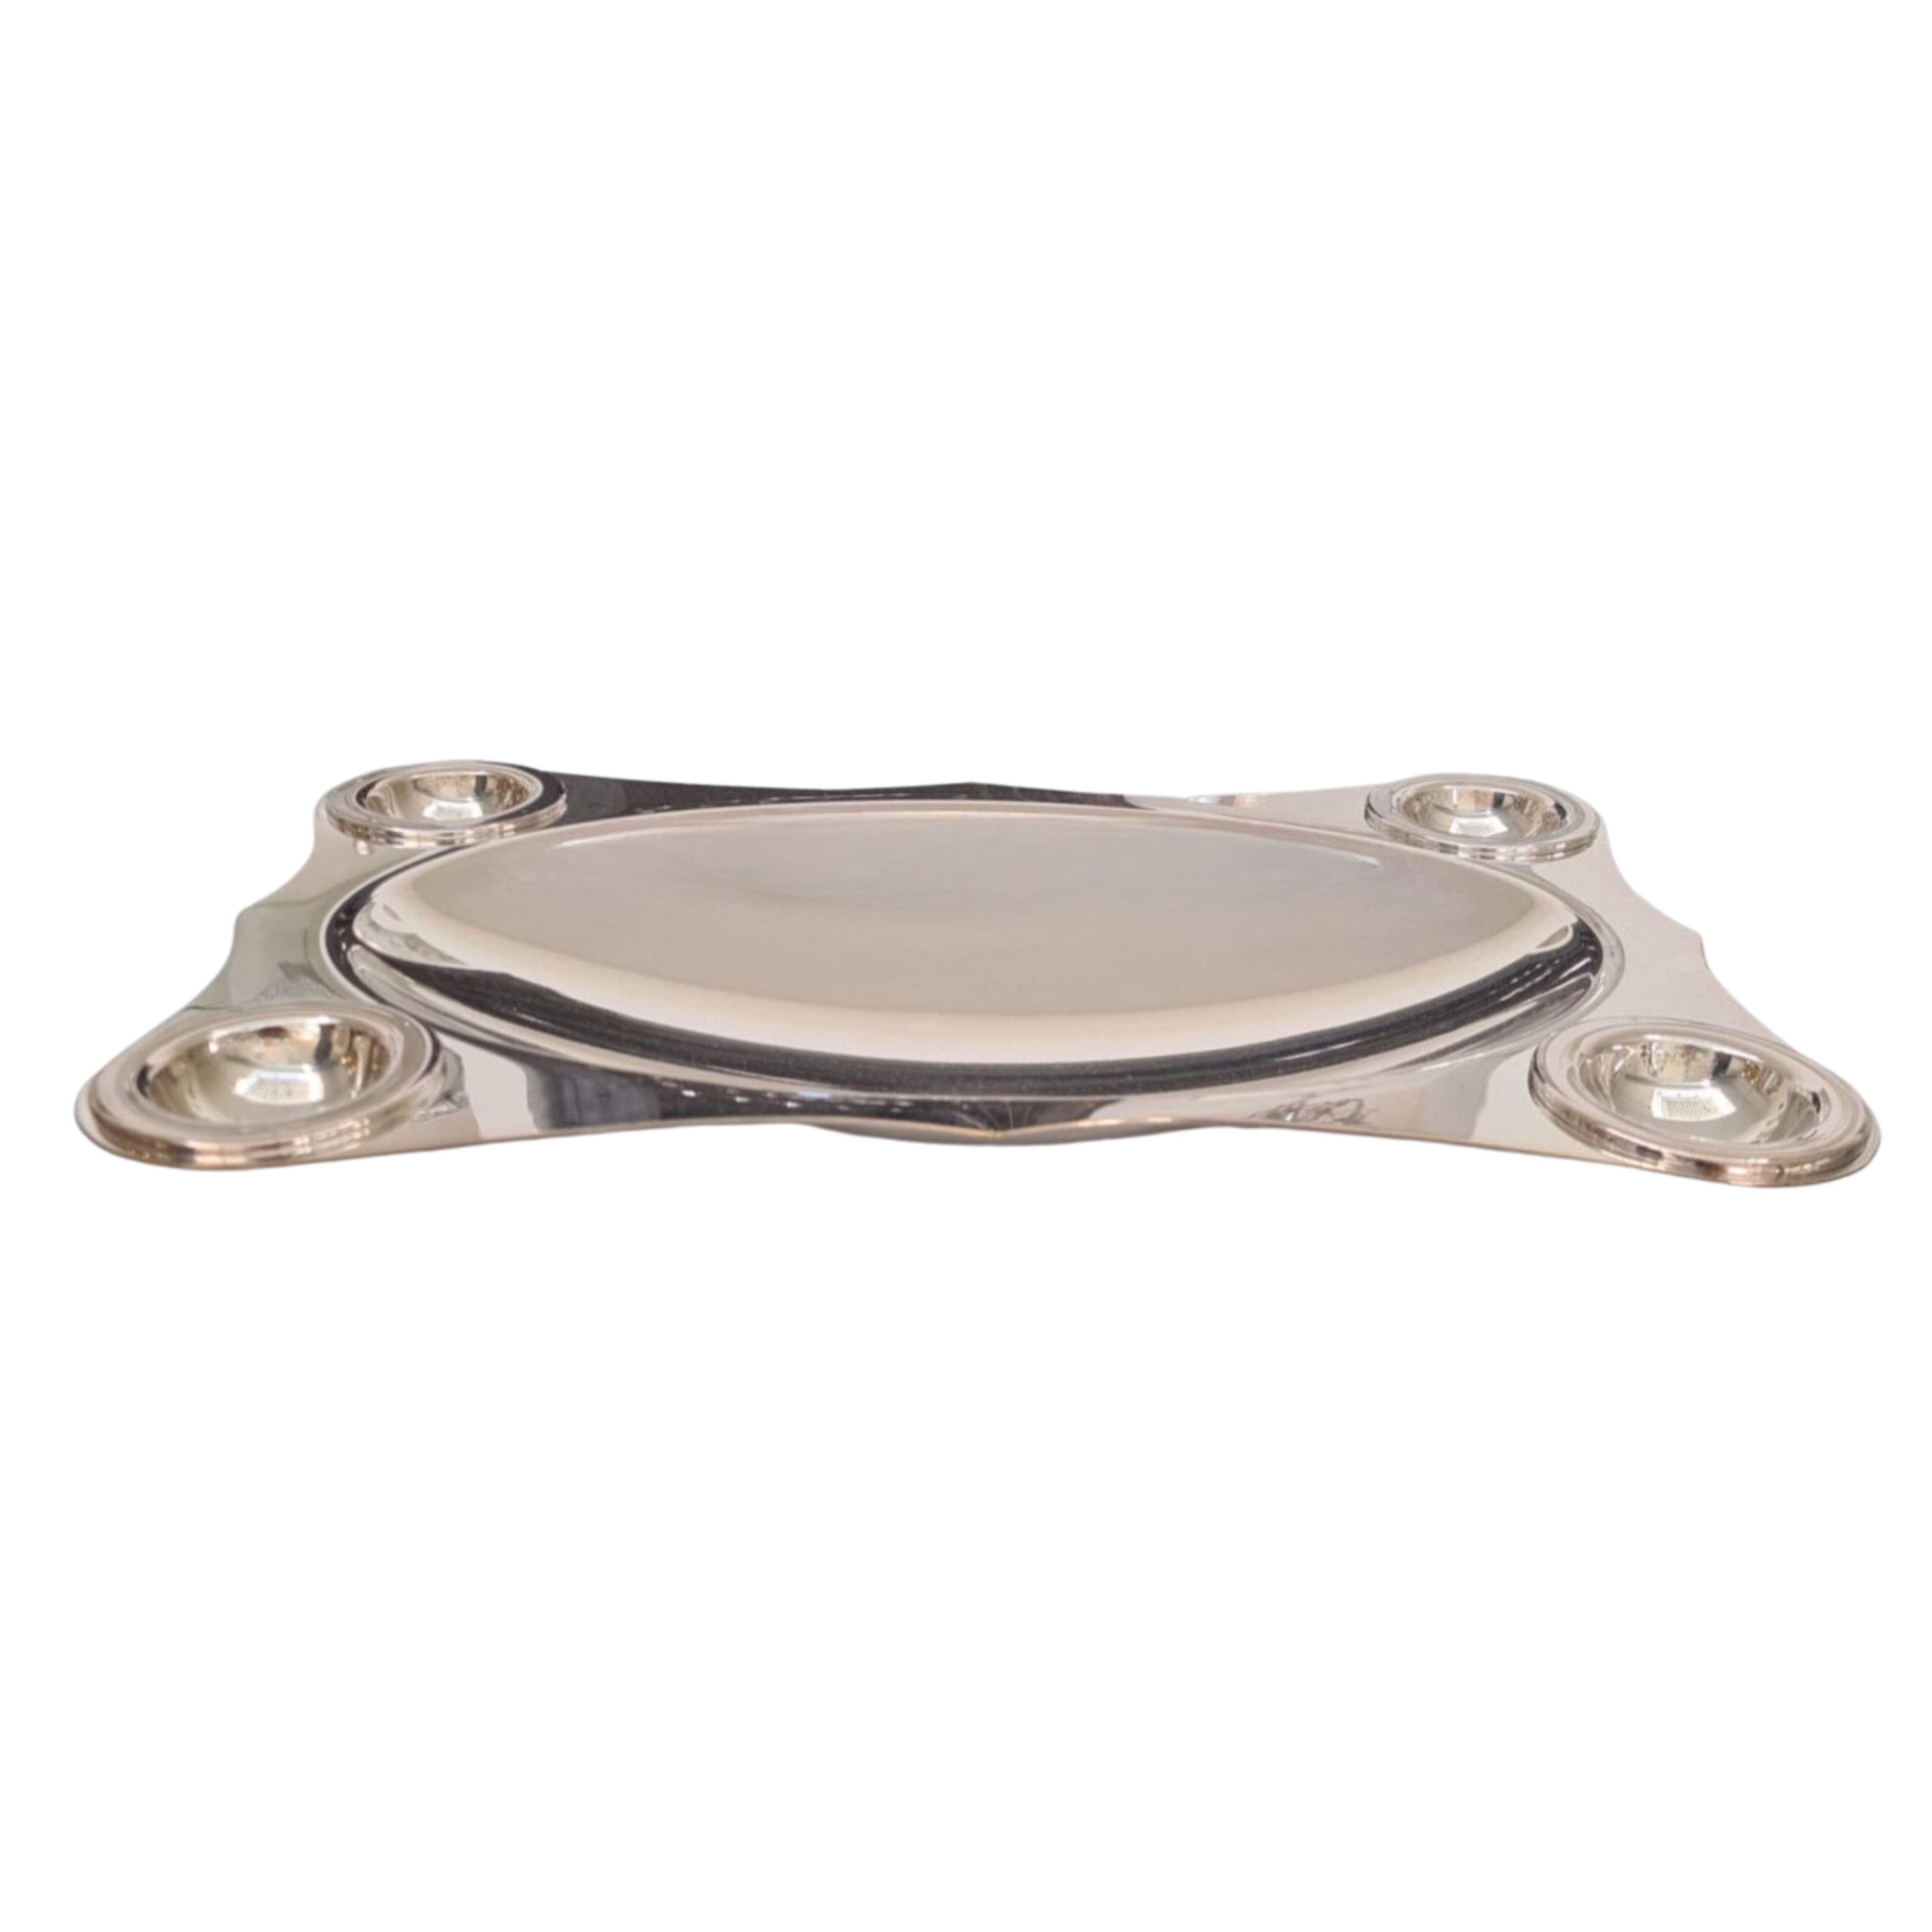 Silver plated centerpiece, with four removable small bowls